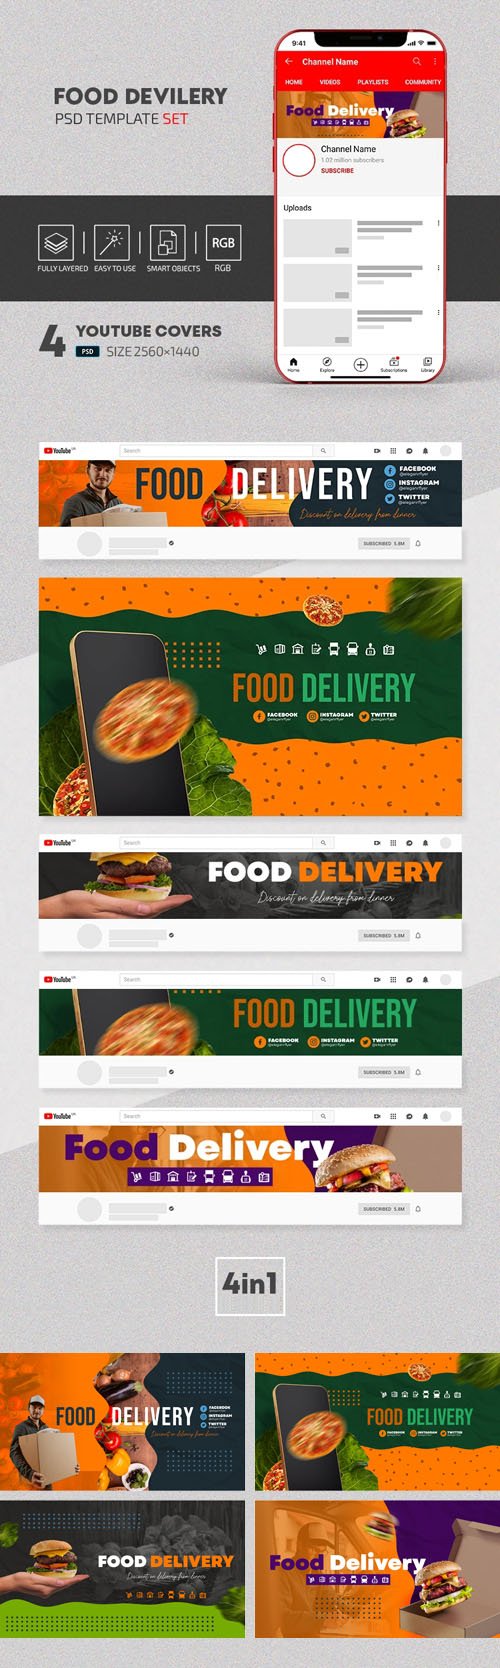 Food Devilery - Youtube Banners PSD Templates